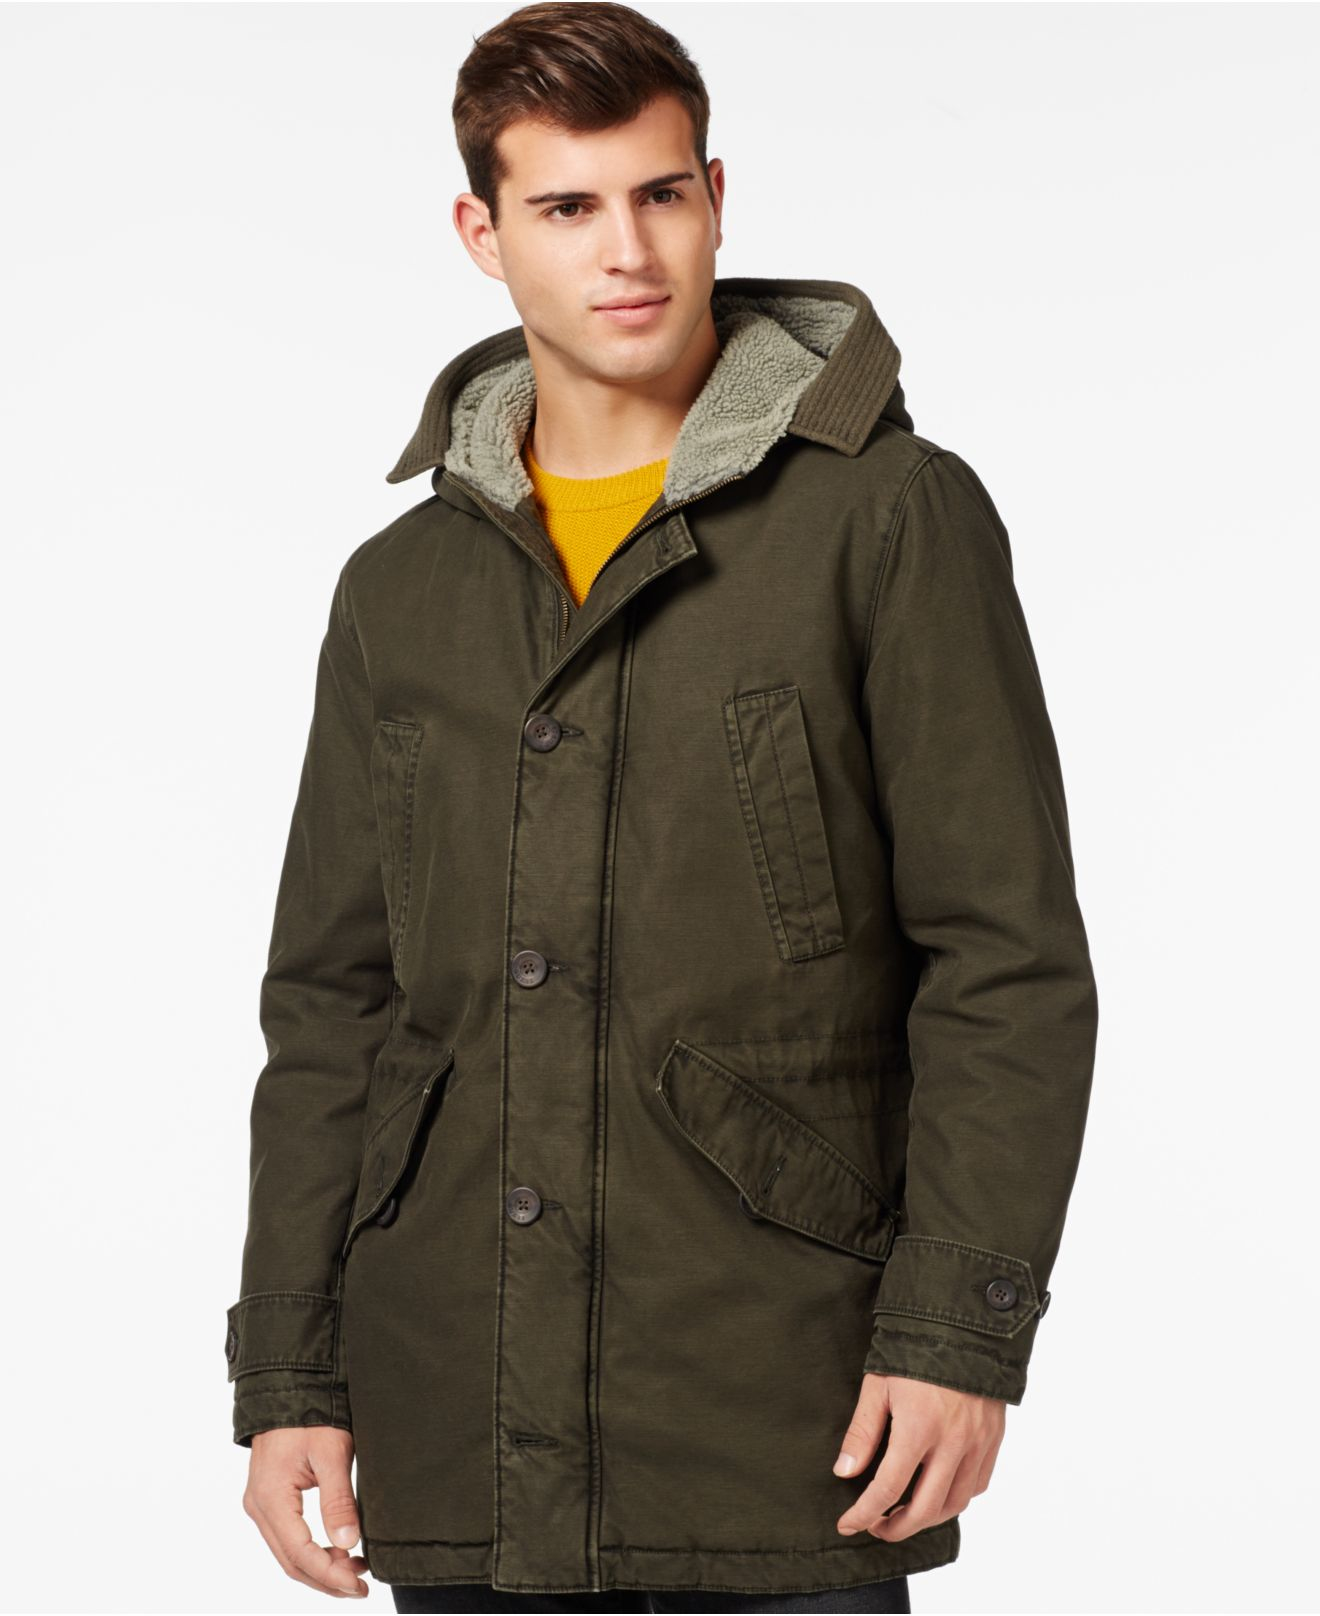 Guess Anorak Jacket With Attached Hood in Olive (Green) for Men - Lyst